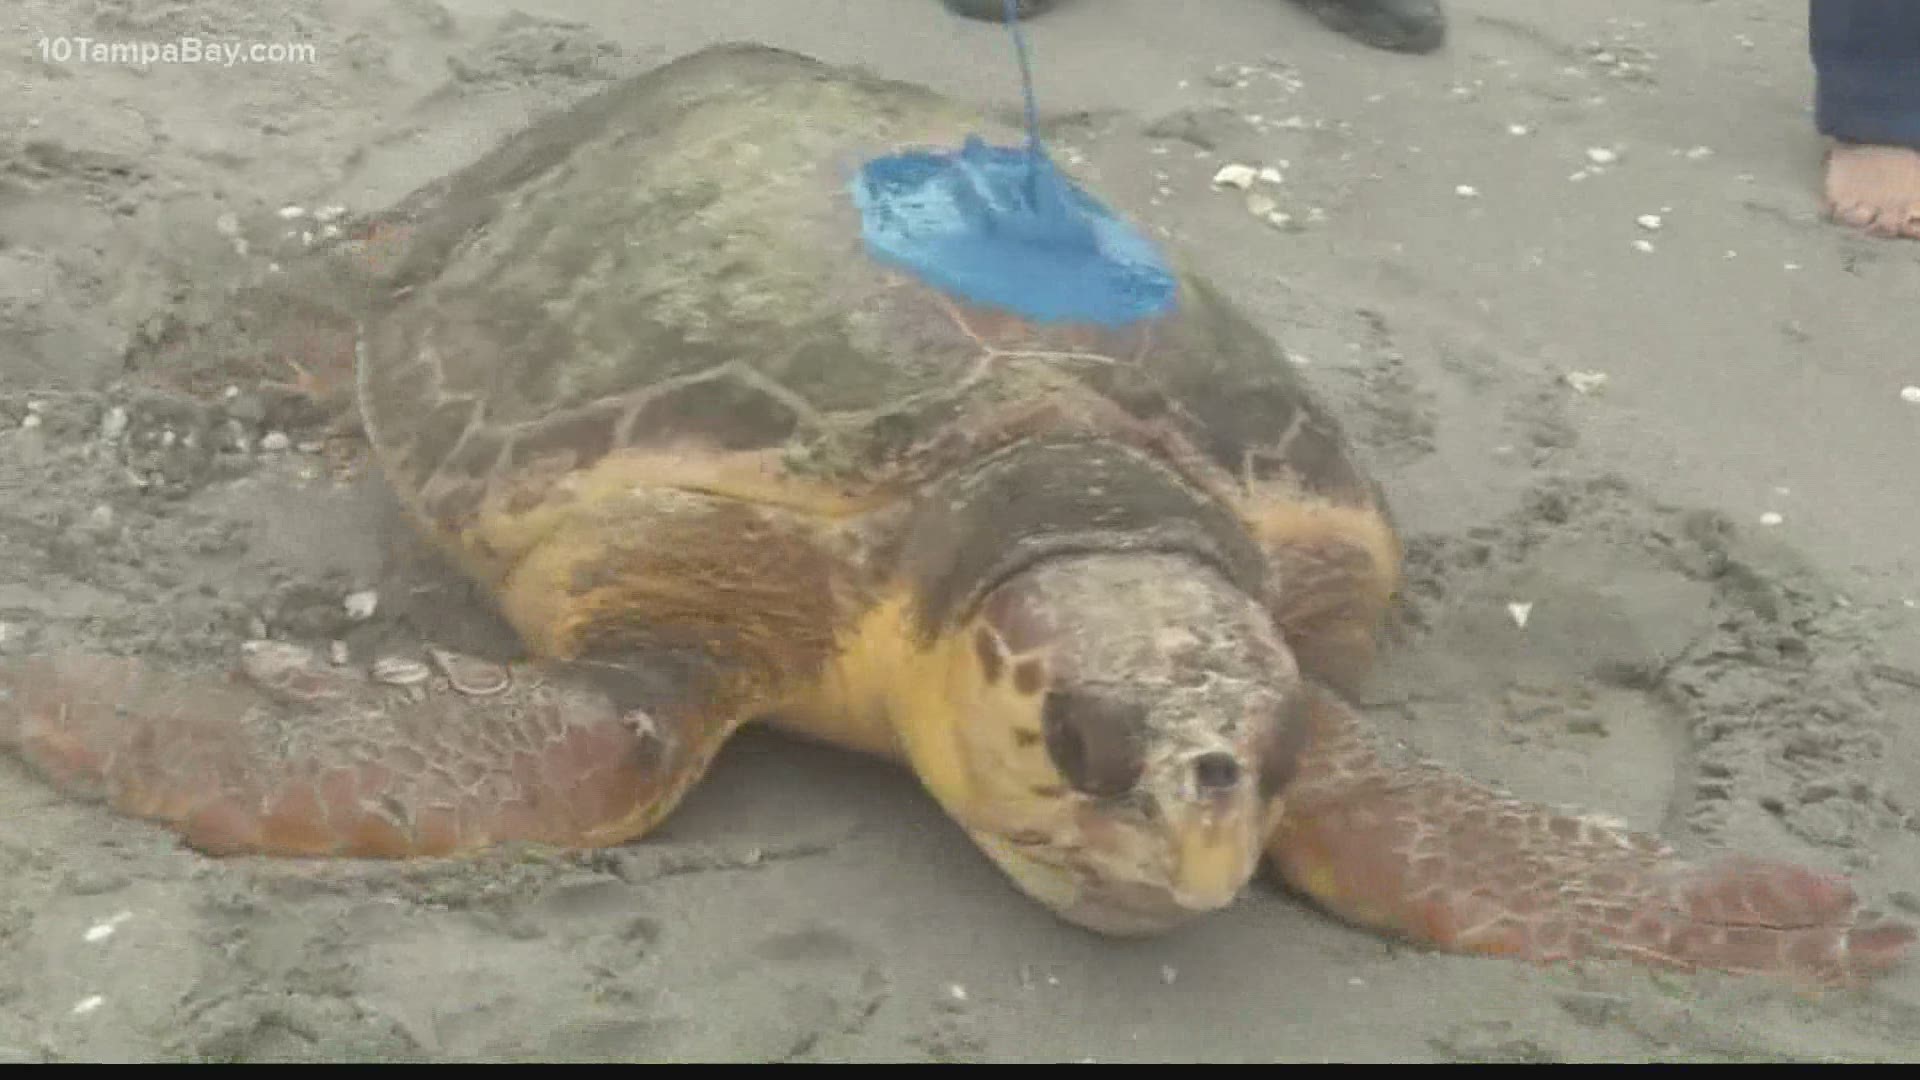 The sea turtle was found stranded in Longboat Key last year.